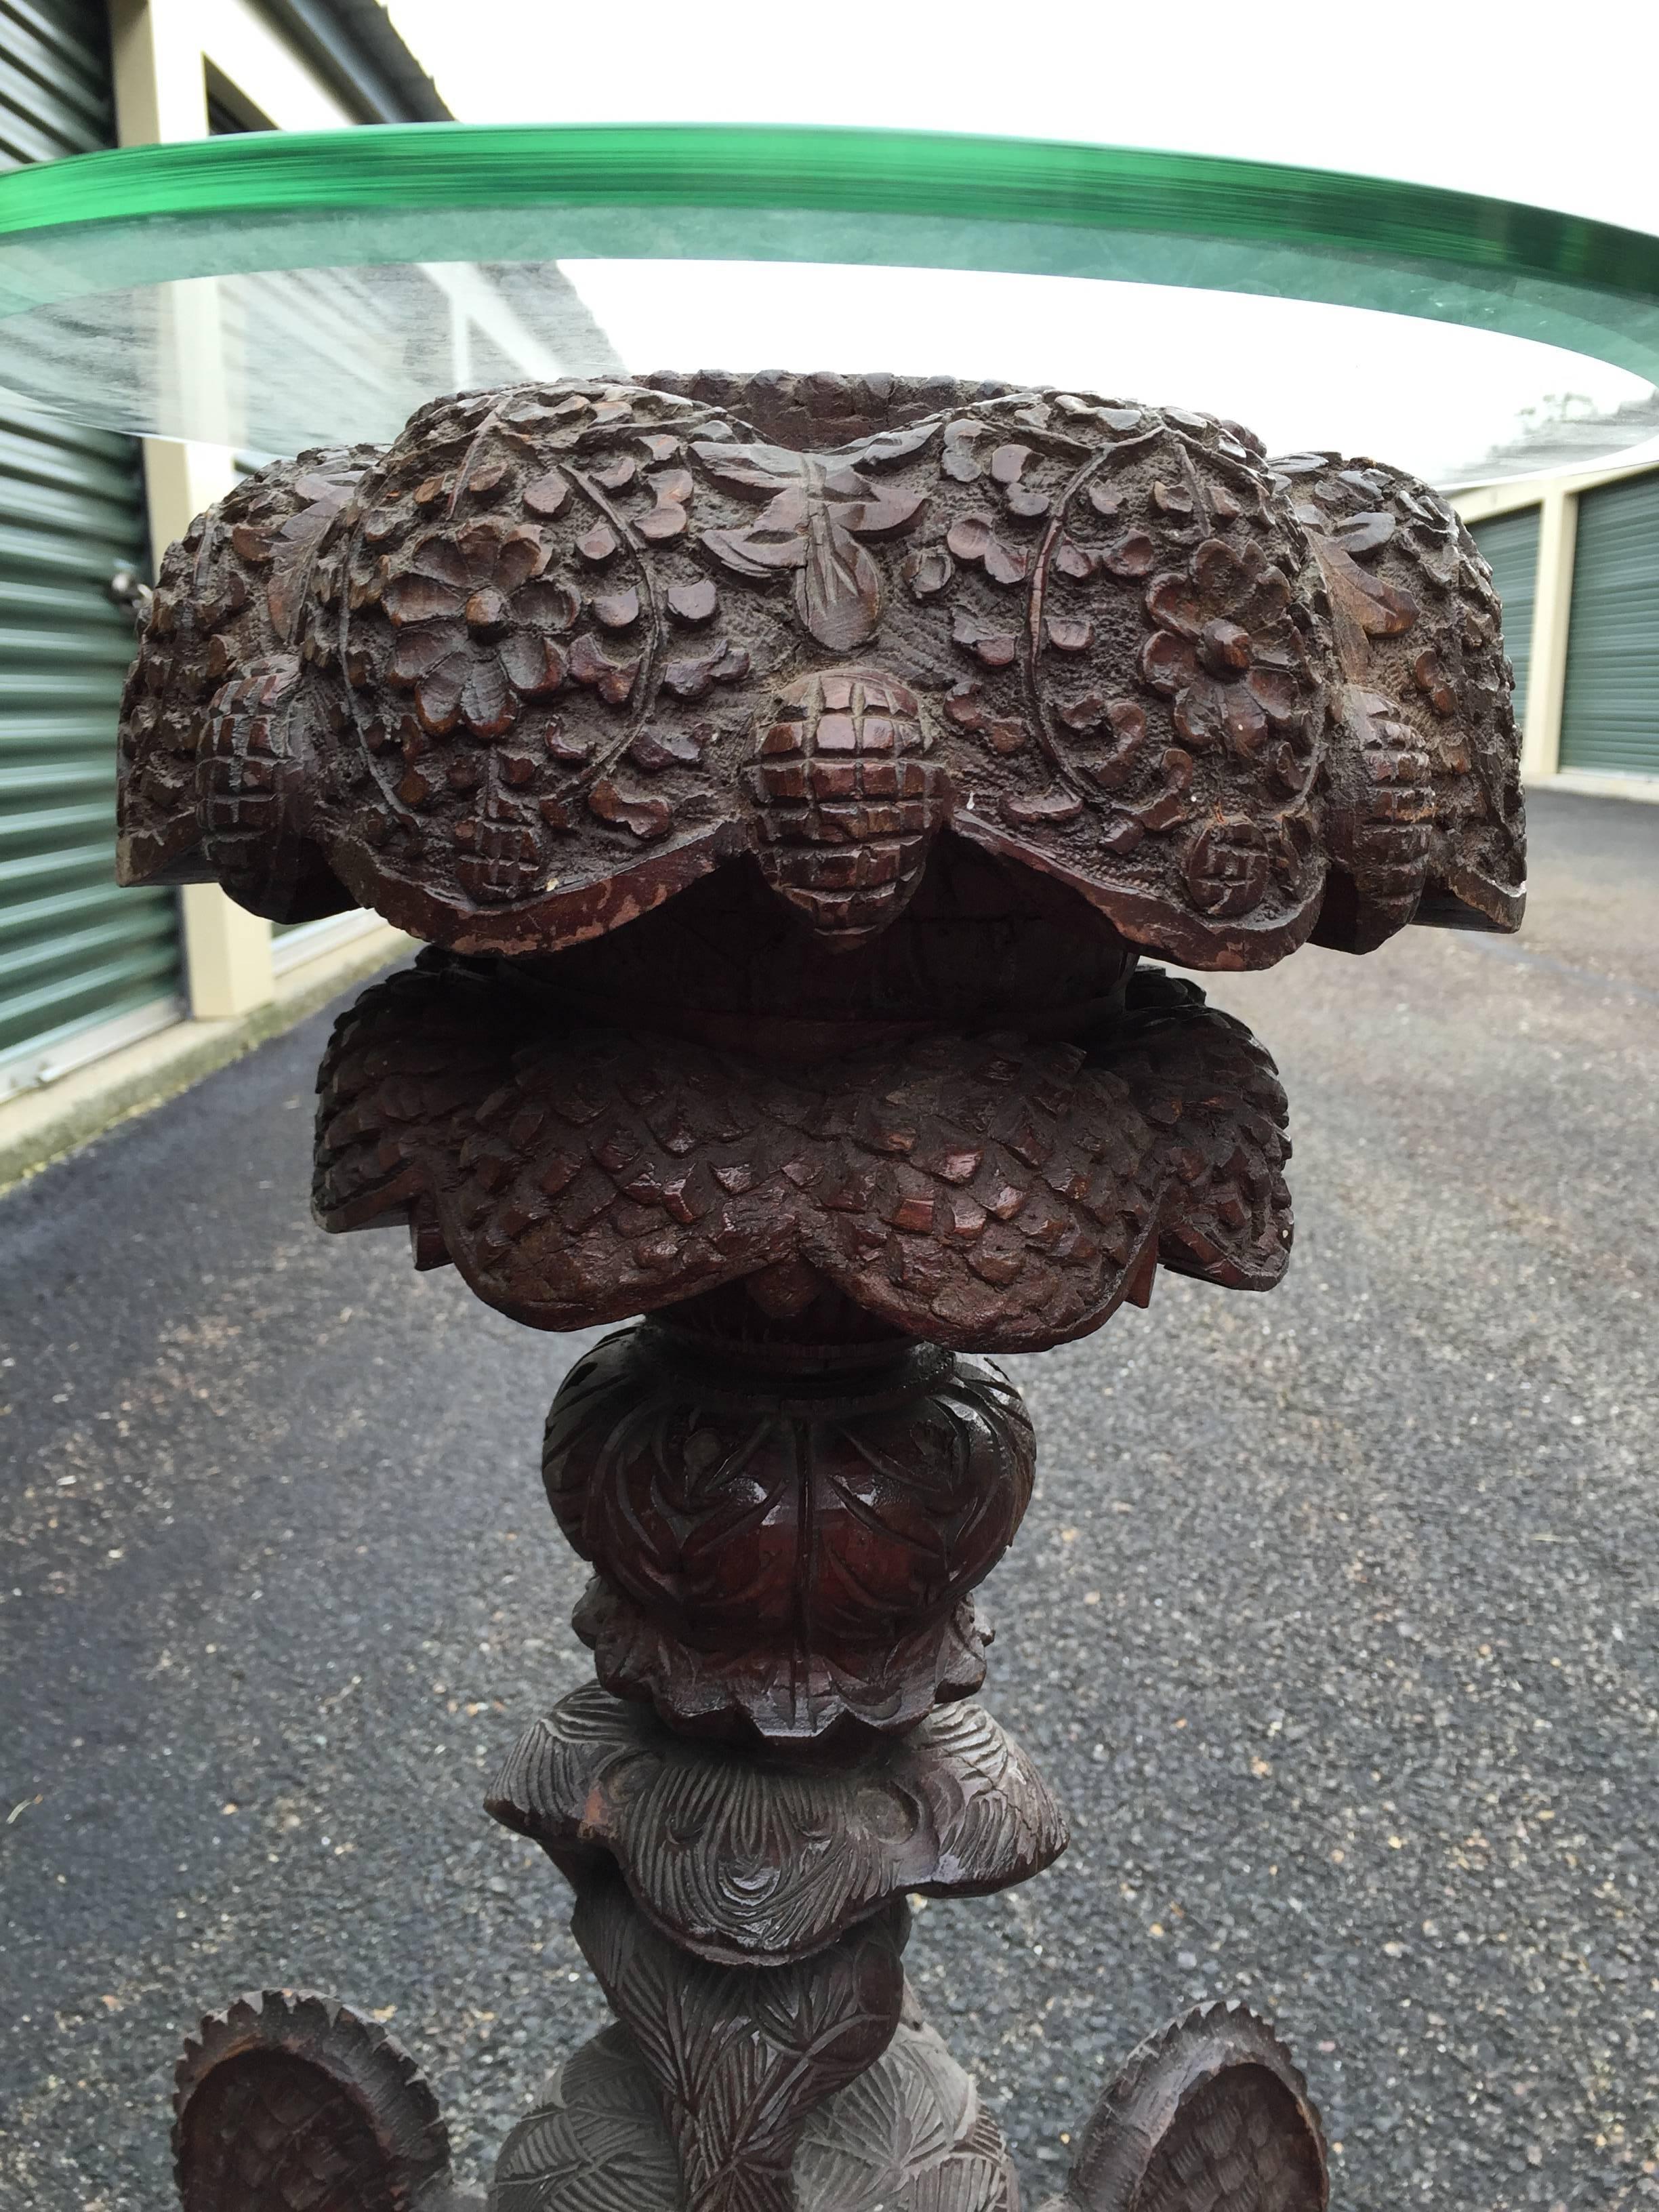 A highly decorative and hard to find Anglo-Indian finely carved and pierced teak wood flower stand  with prolific floriate and wild life design.

Period: Circa 1860-1880, likely carved from the Bombay, India region.

Dimensions: 45 inches high and